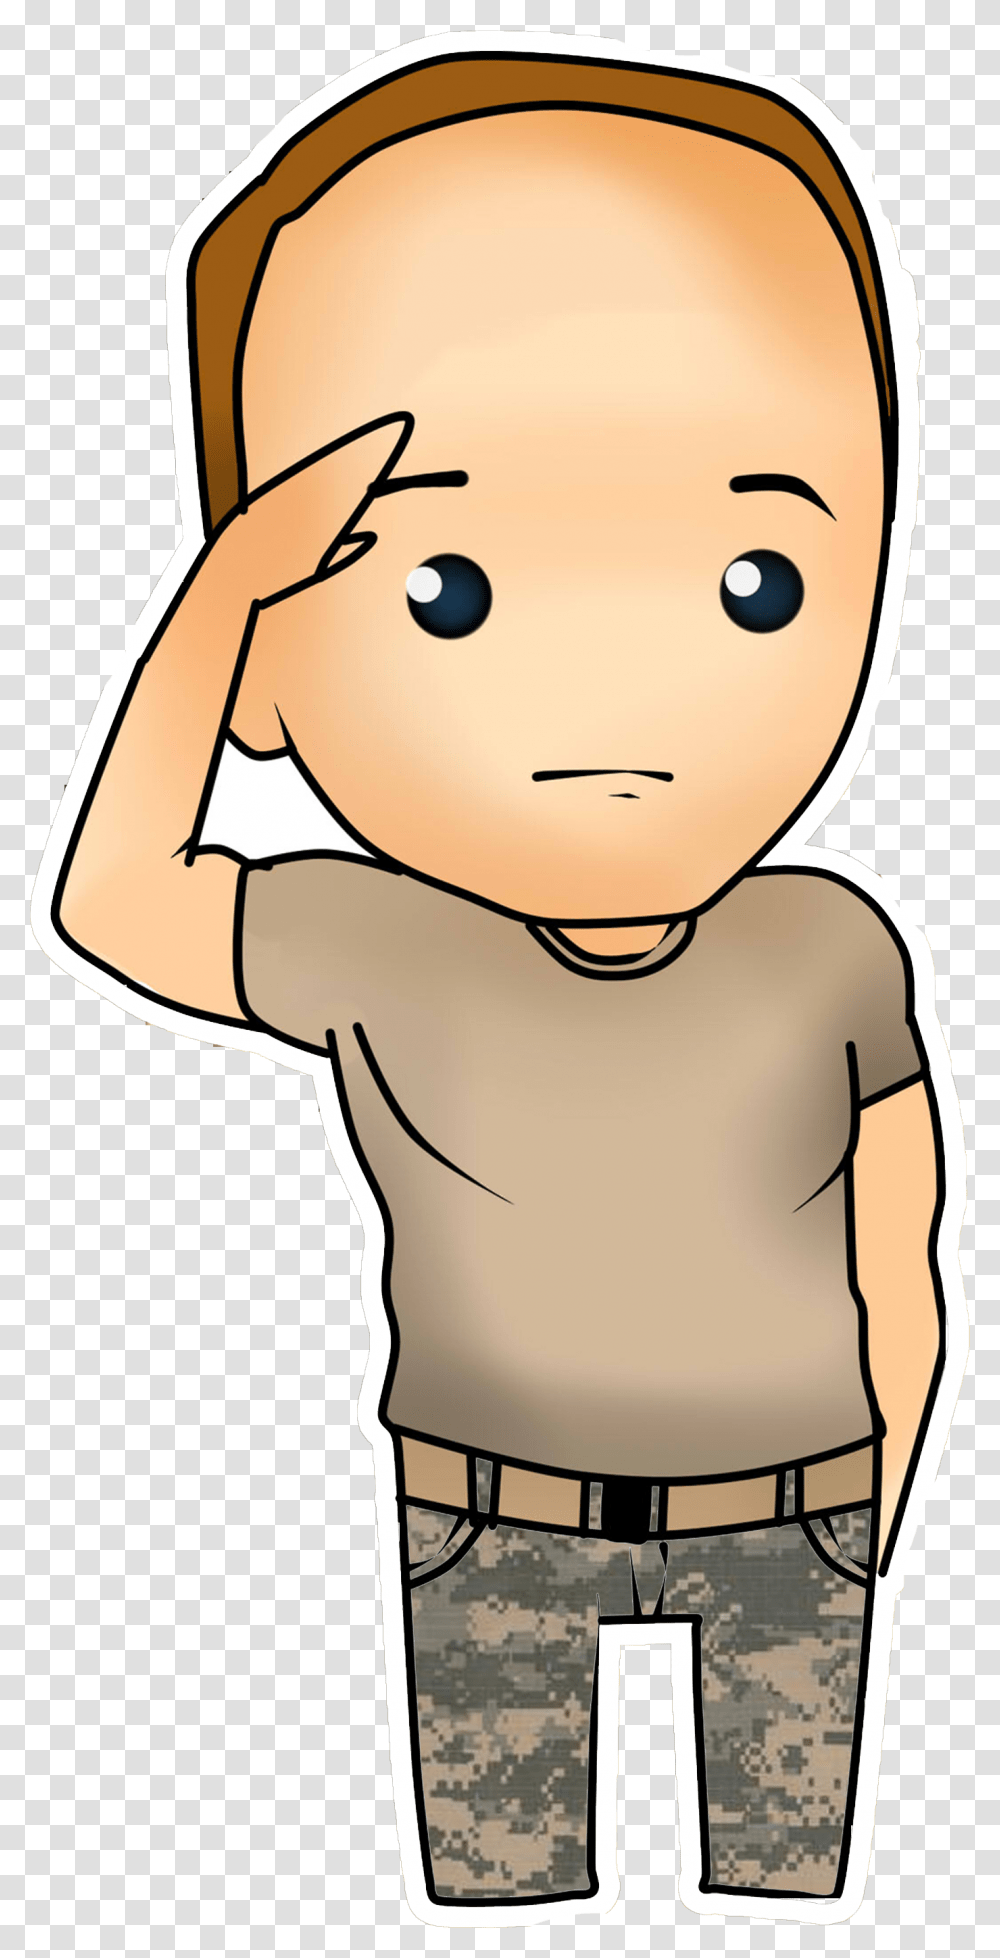 Cartoon Images Of Military Training, Doll, Toy, Helmet Transparent Png